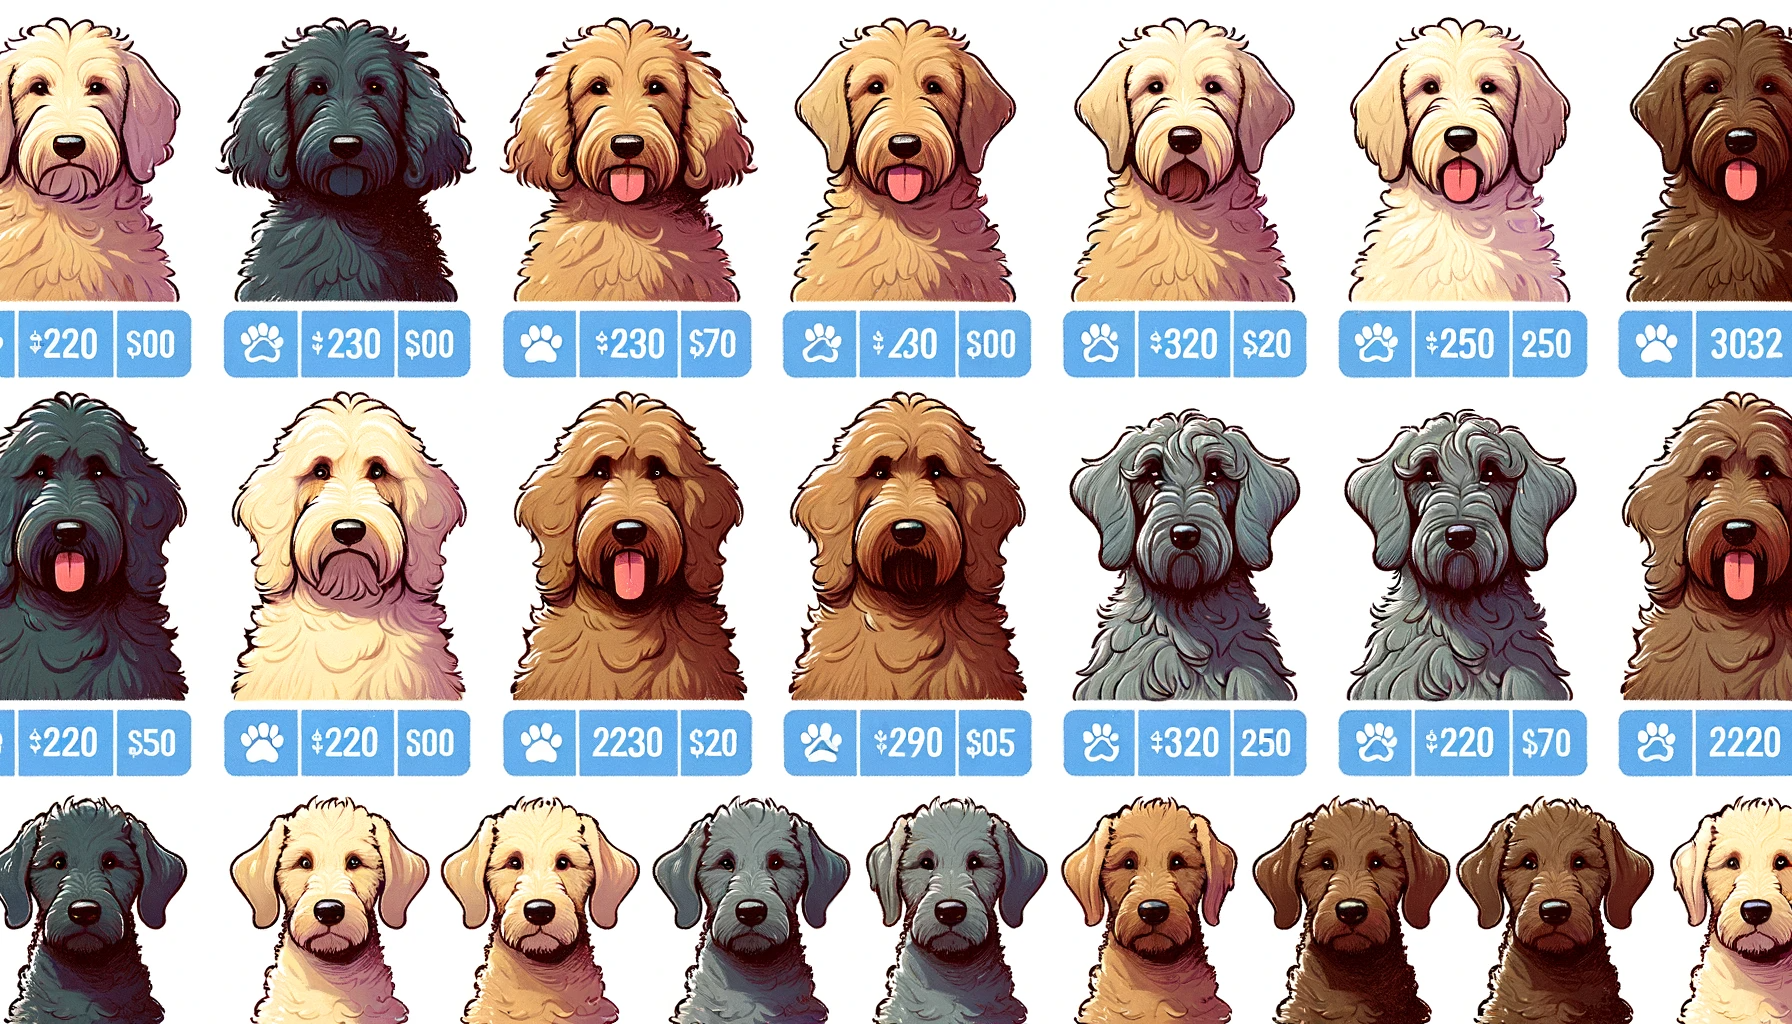 Illustration showcasing various types of Labradoodles, each with its unique fur and color. Every Labradoodle is accompanied by a different digital price tag, representing the varying costs associated with the specific type or lineage.